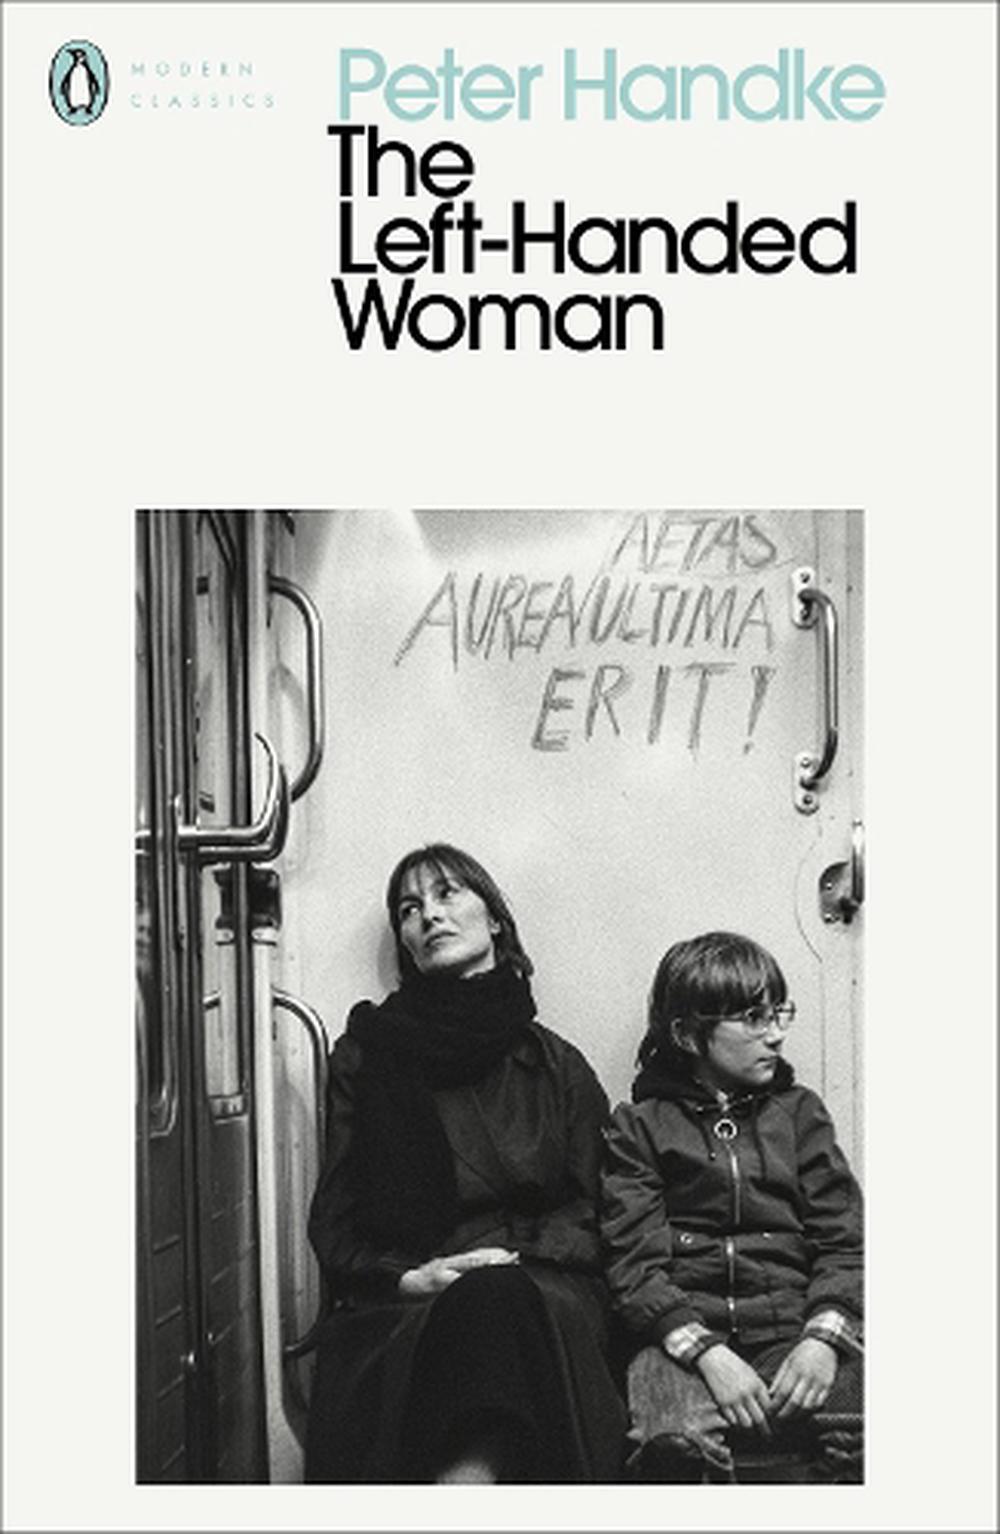 Paperback,　online　Left-Handed　The　Nile　Woman　9780241457672　Handke,　by　Peter　The　Buy　at